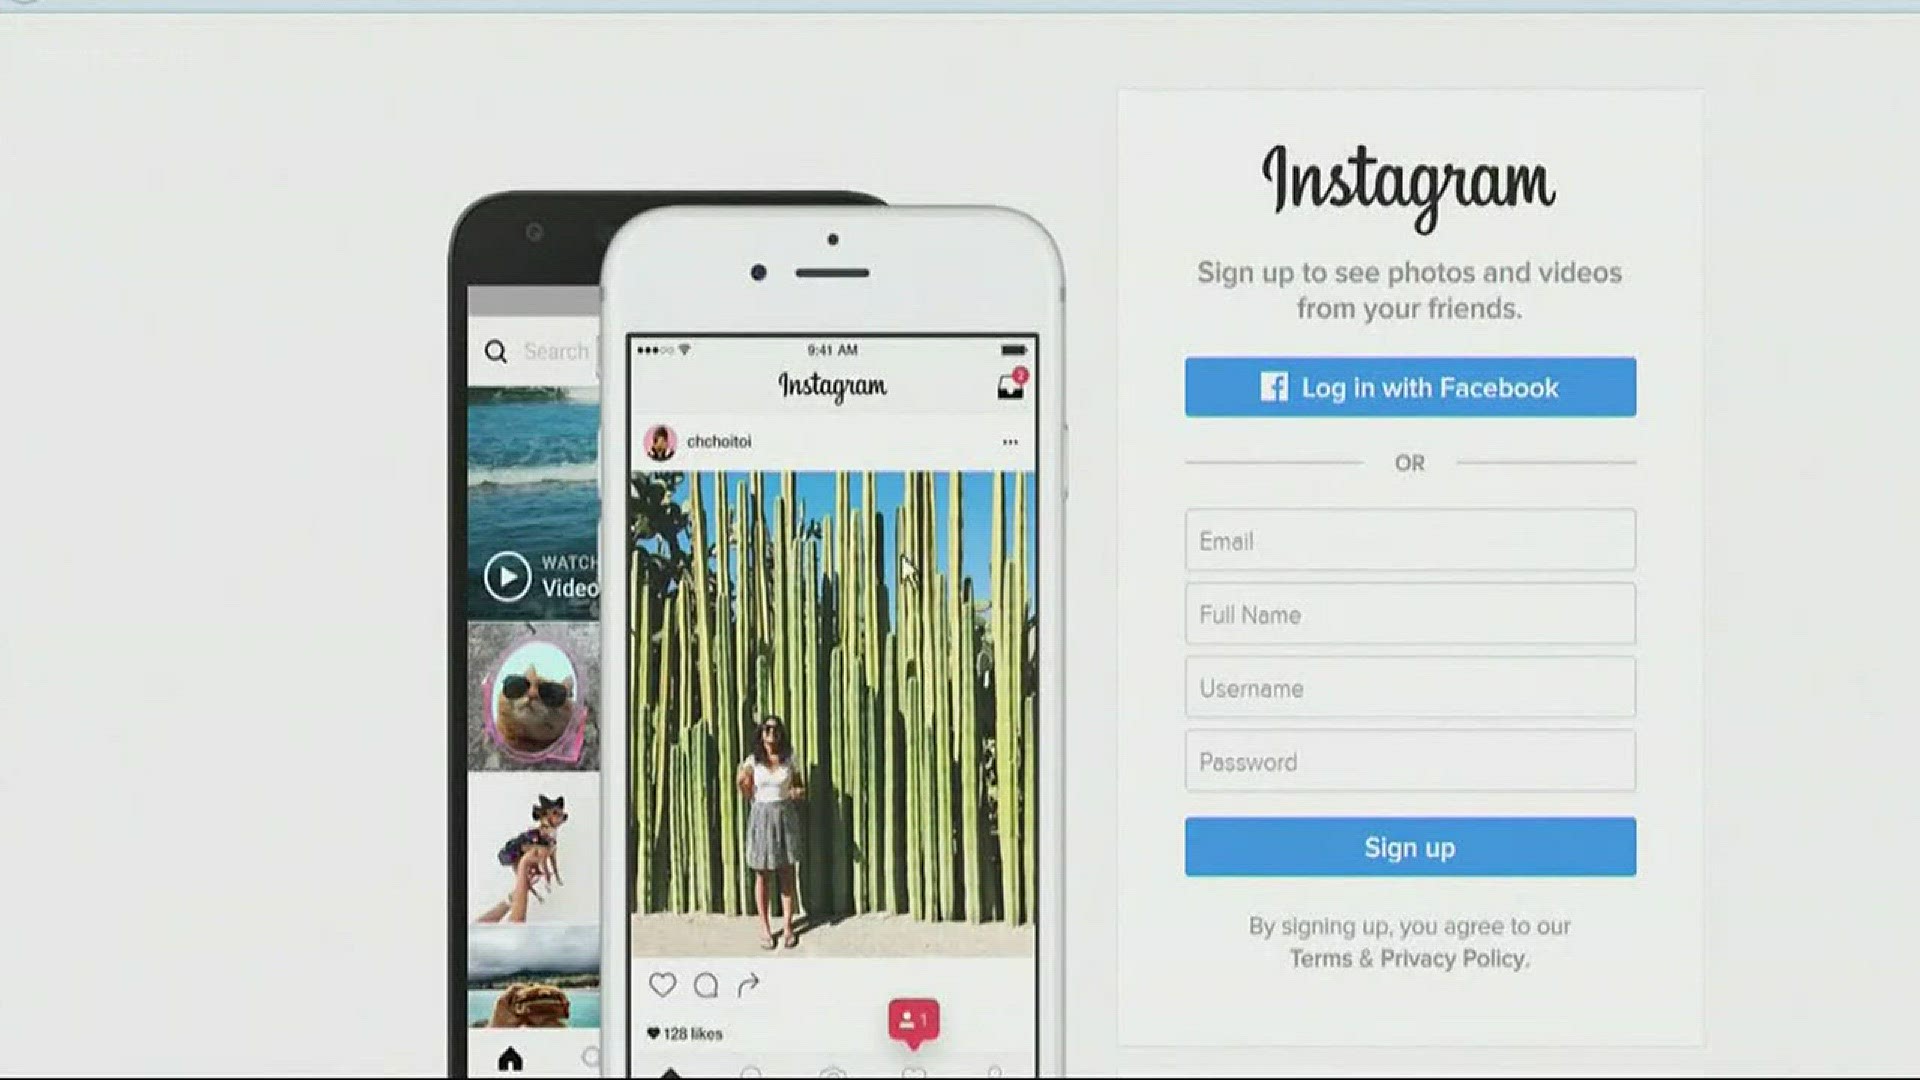 Instagram Will Now Let You Live-Stream with a Friend